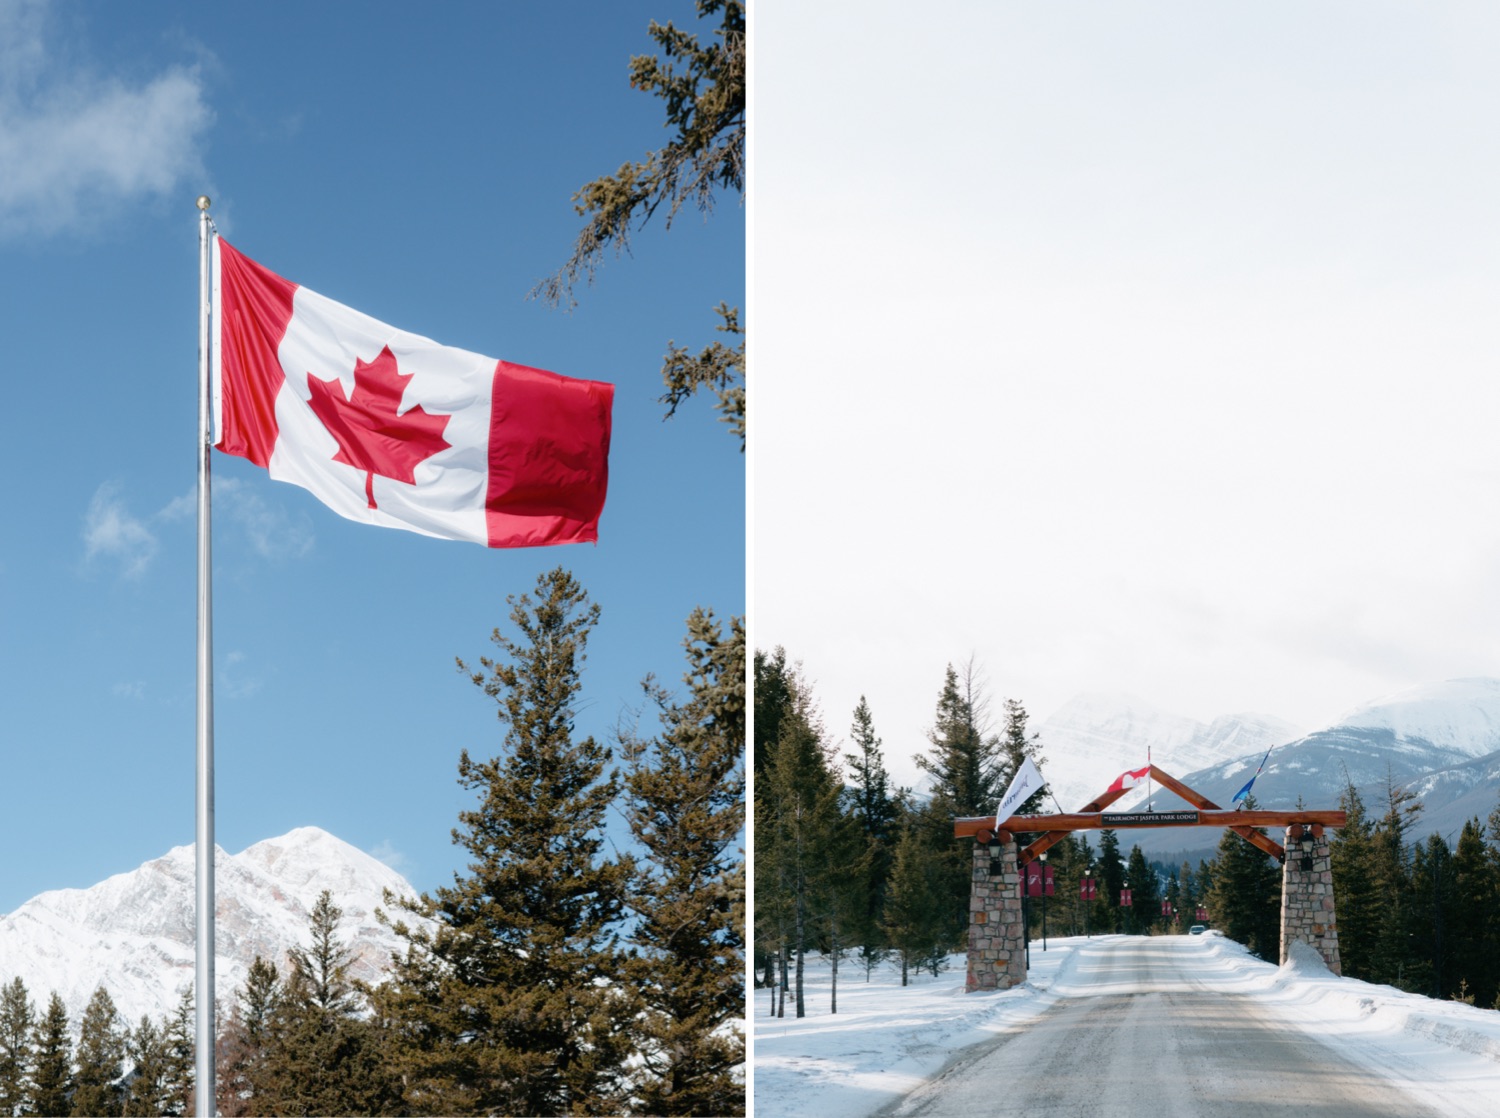 The Canadian flag and Jasper Park Lodge entrance banner on a winter day with blue skies and snow laden peaks in the background